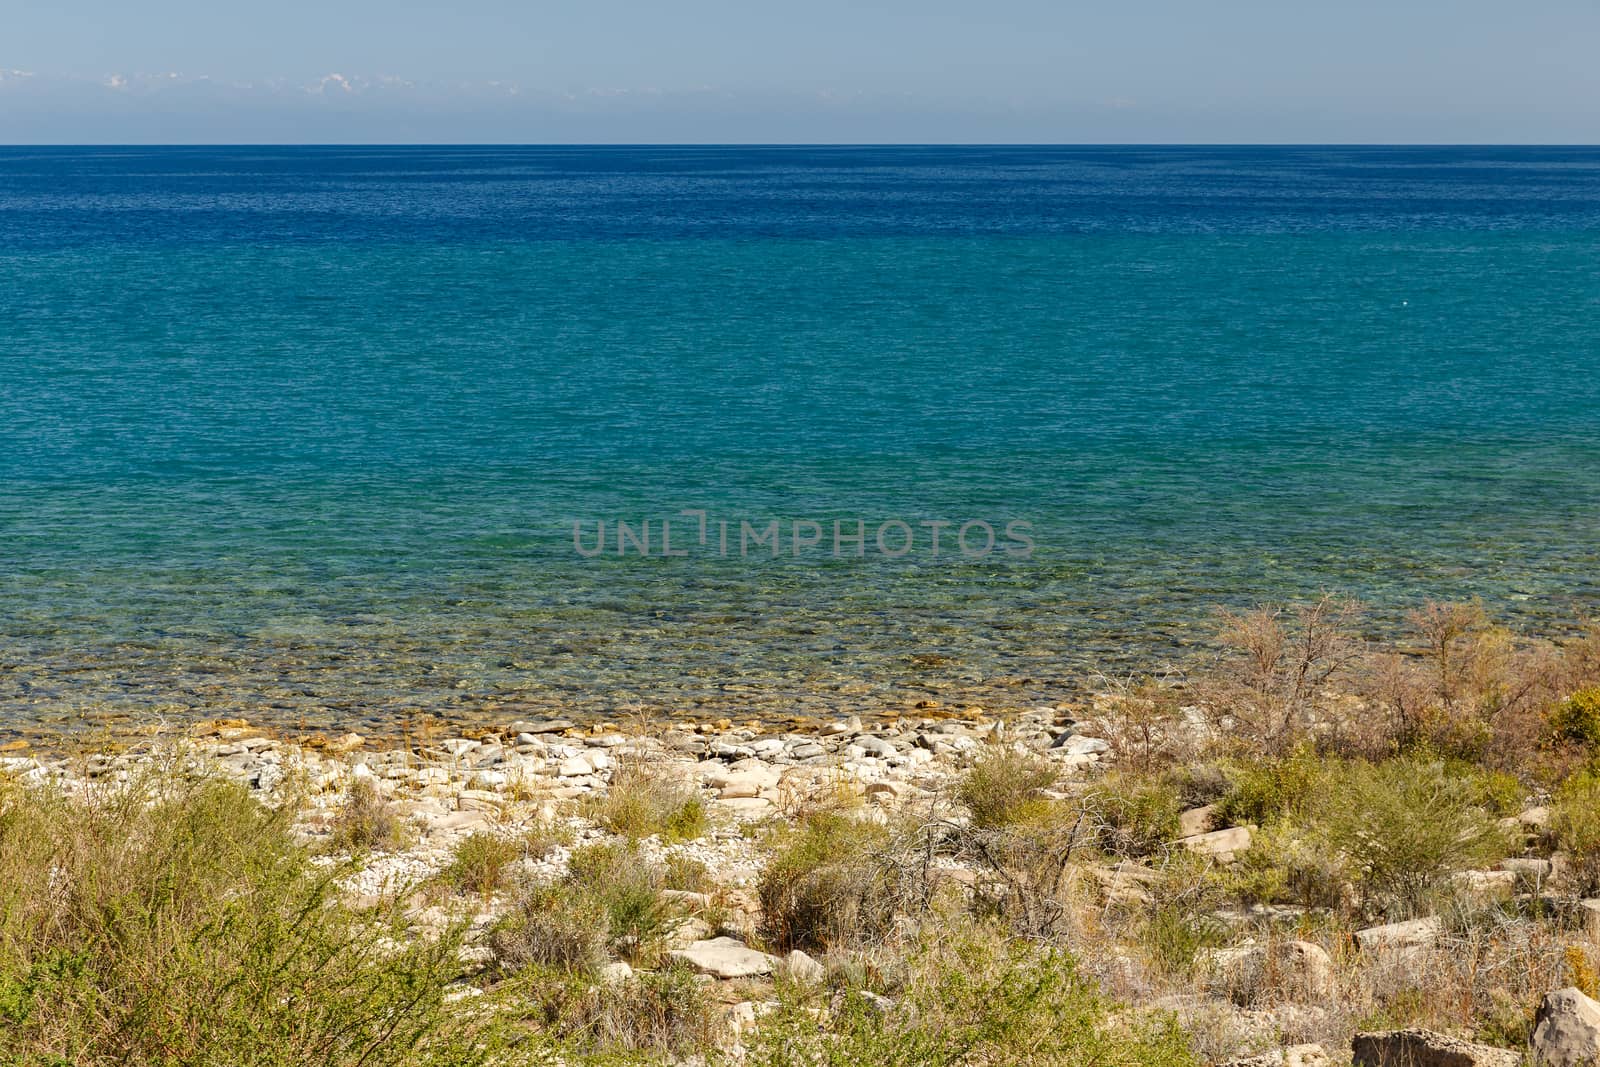 Lake Issyk-kul, the largest lake in Kyrgyzstan, beautiful landscape on the south shore of the lake